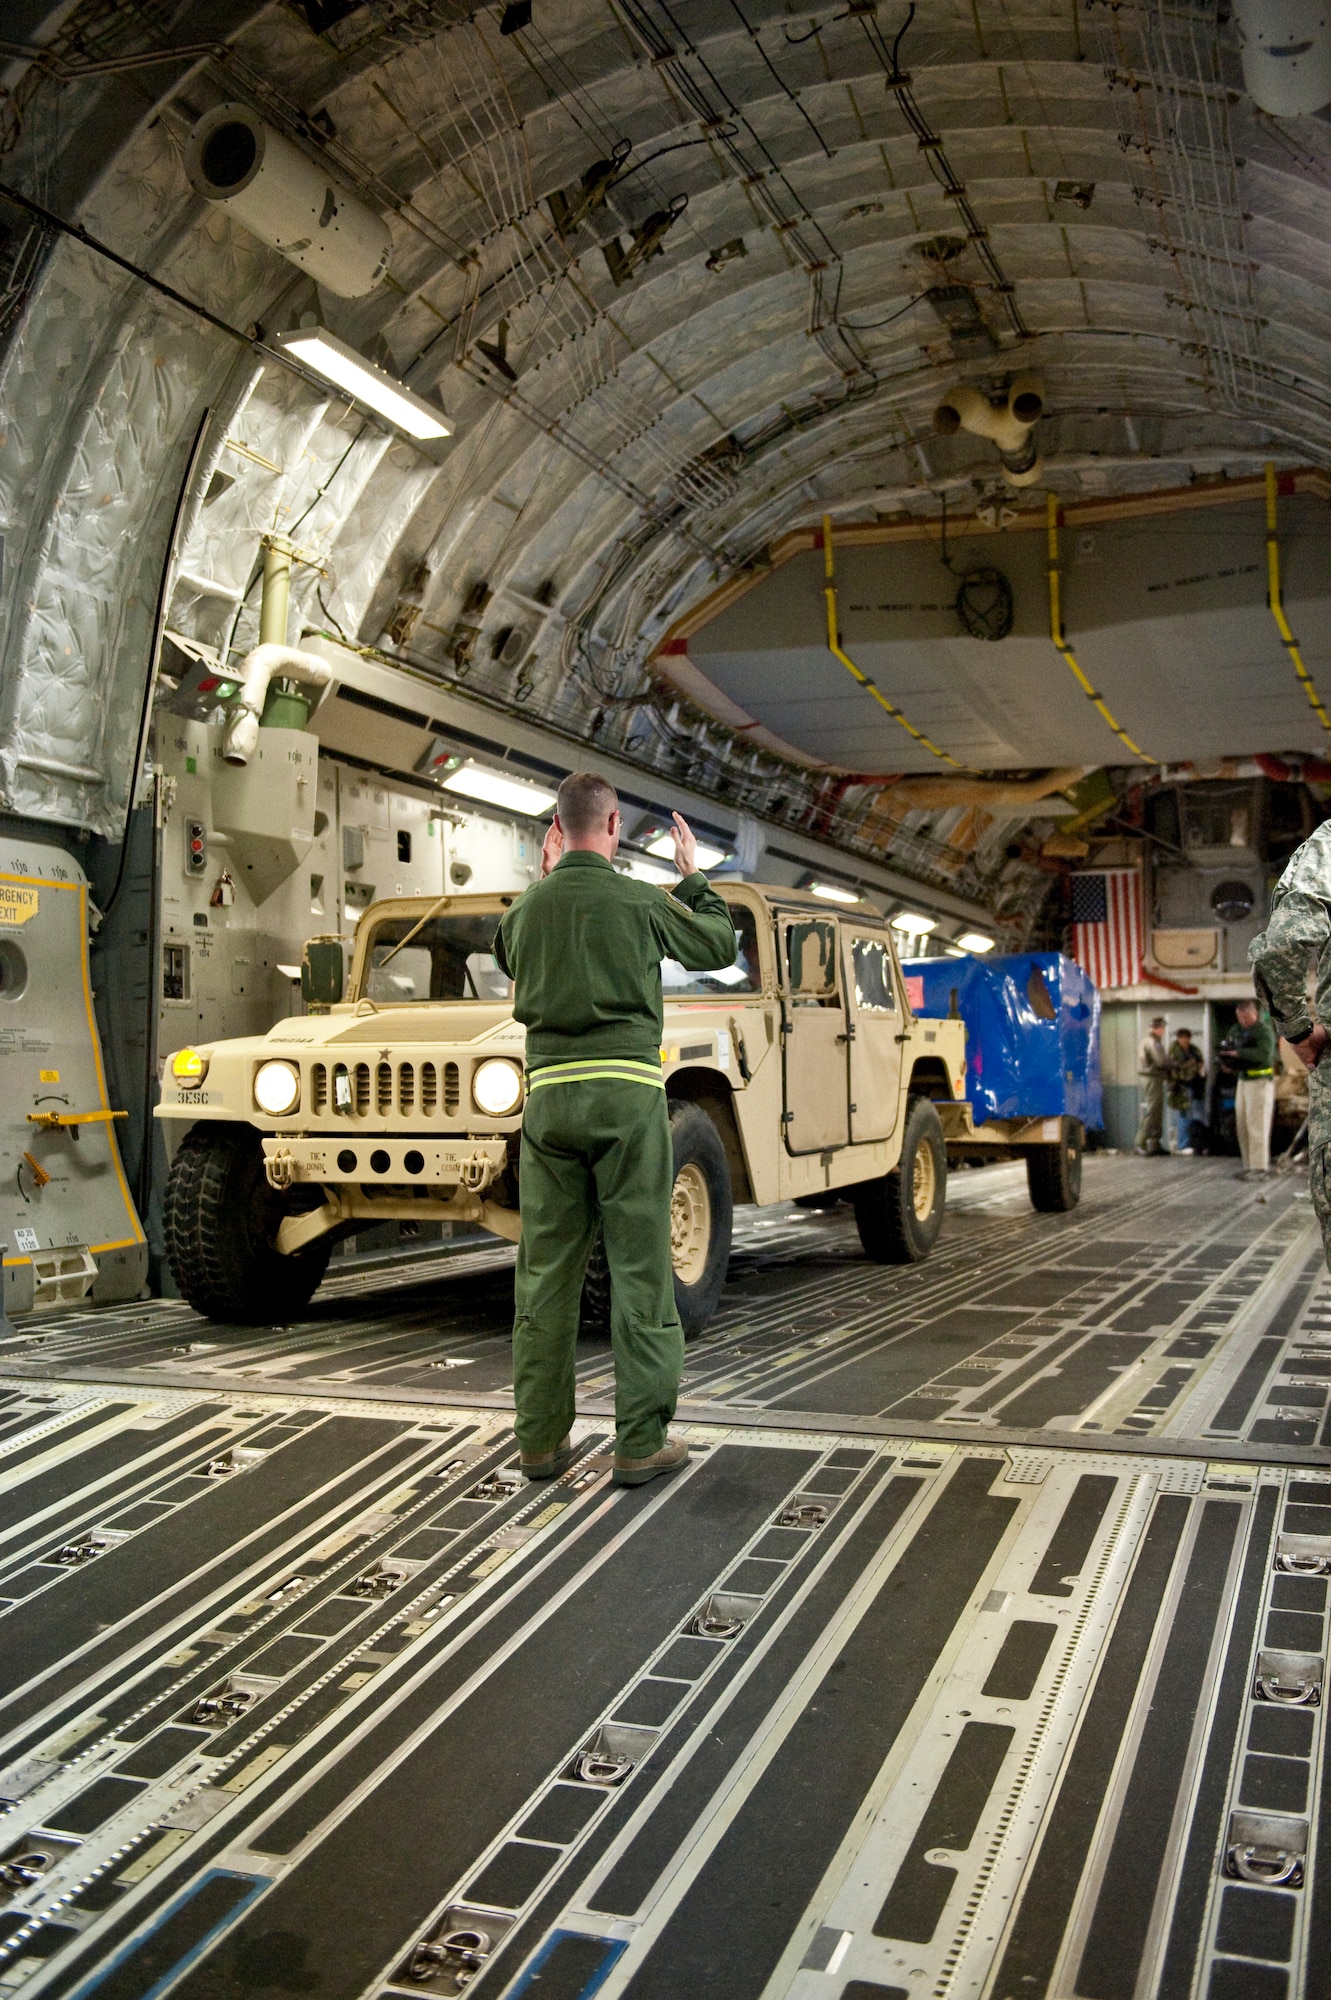 Air Force Tech. Sgt. Cecil Dickerson, a loadmaster from the Alaska Air National Guard?s 249th Airlift Squadron, directs an Army Humvee onto a Mississippi Air National Guard C-17 aircraft at the Kentucky Air National Guard Base in Louisville, Ky., on Jan. 27, 2010. The Humvee, along with 90 tons of other equipment and about 40 soldiers from the 3rd Sustainment Command (Expeditionary), were deploying to Port-au-Prince, Haiti, for earthquake relief efforts as part of Operation Unified Response. The Fort Knox, Ky.-based unit is expected to stay in Haiti for up to six months. (U.S. Air Force photo by Maj. Dale Greer/Released)